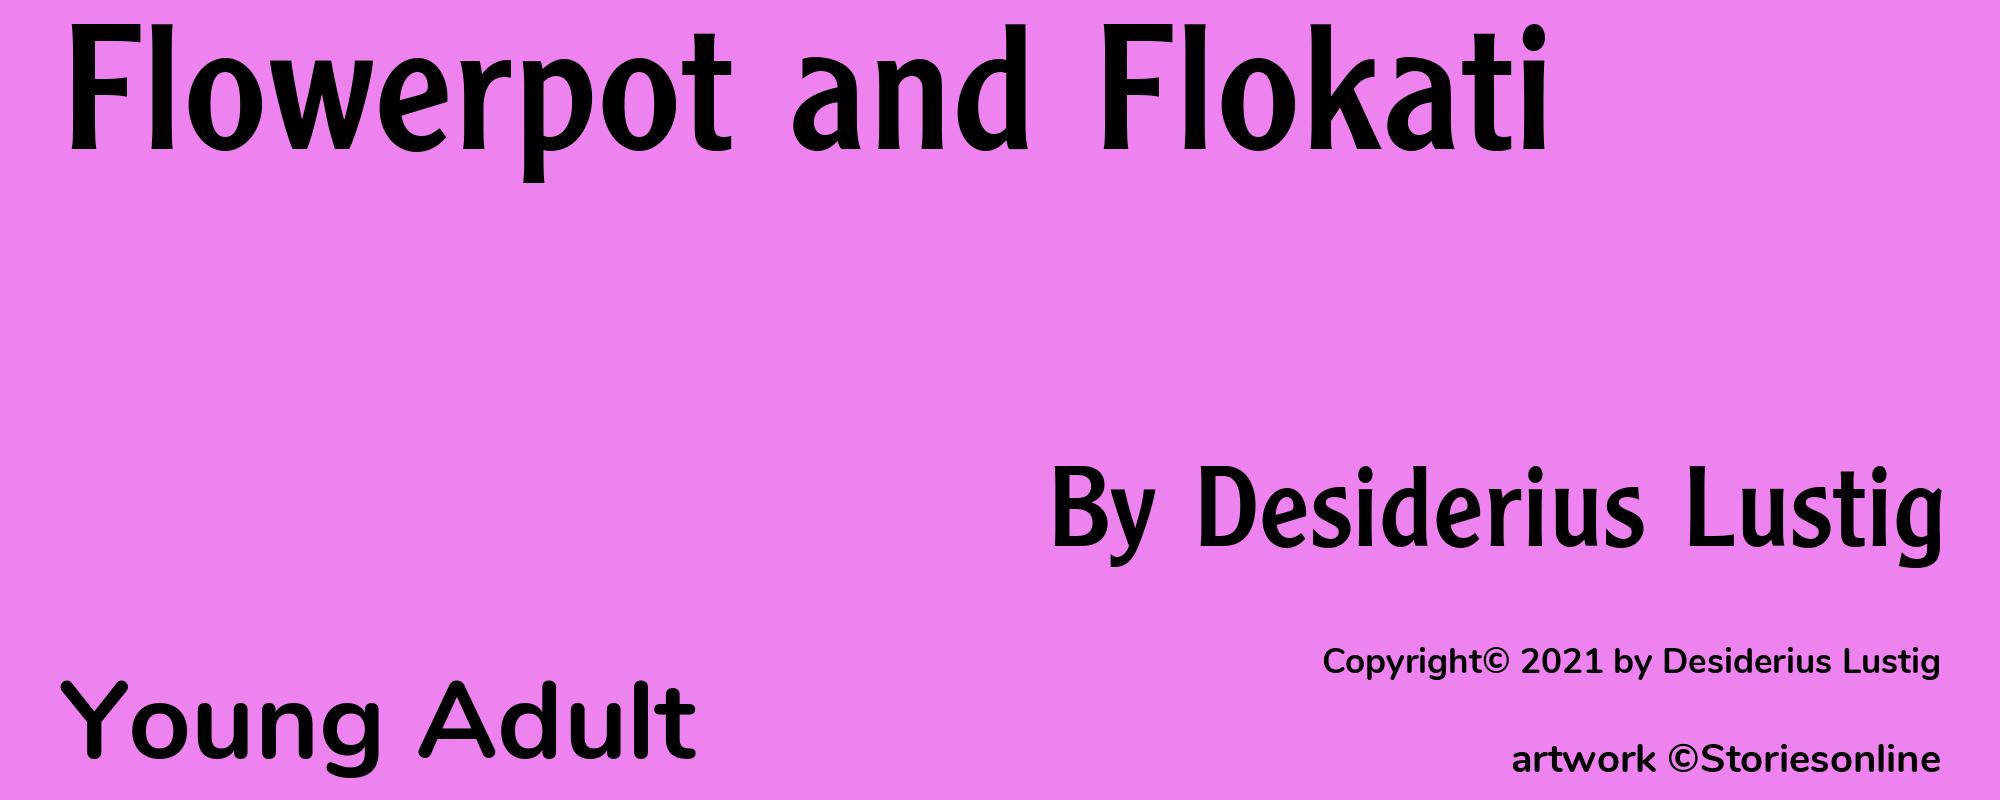 Flowerpot and Flokati - Cover